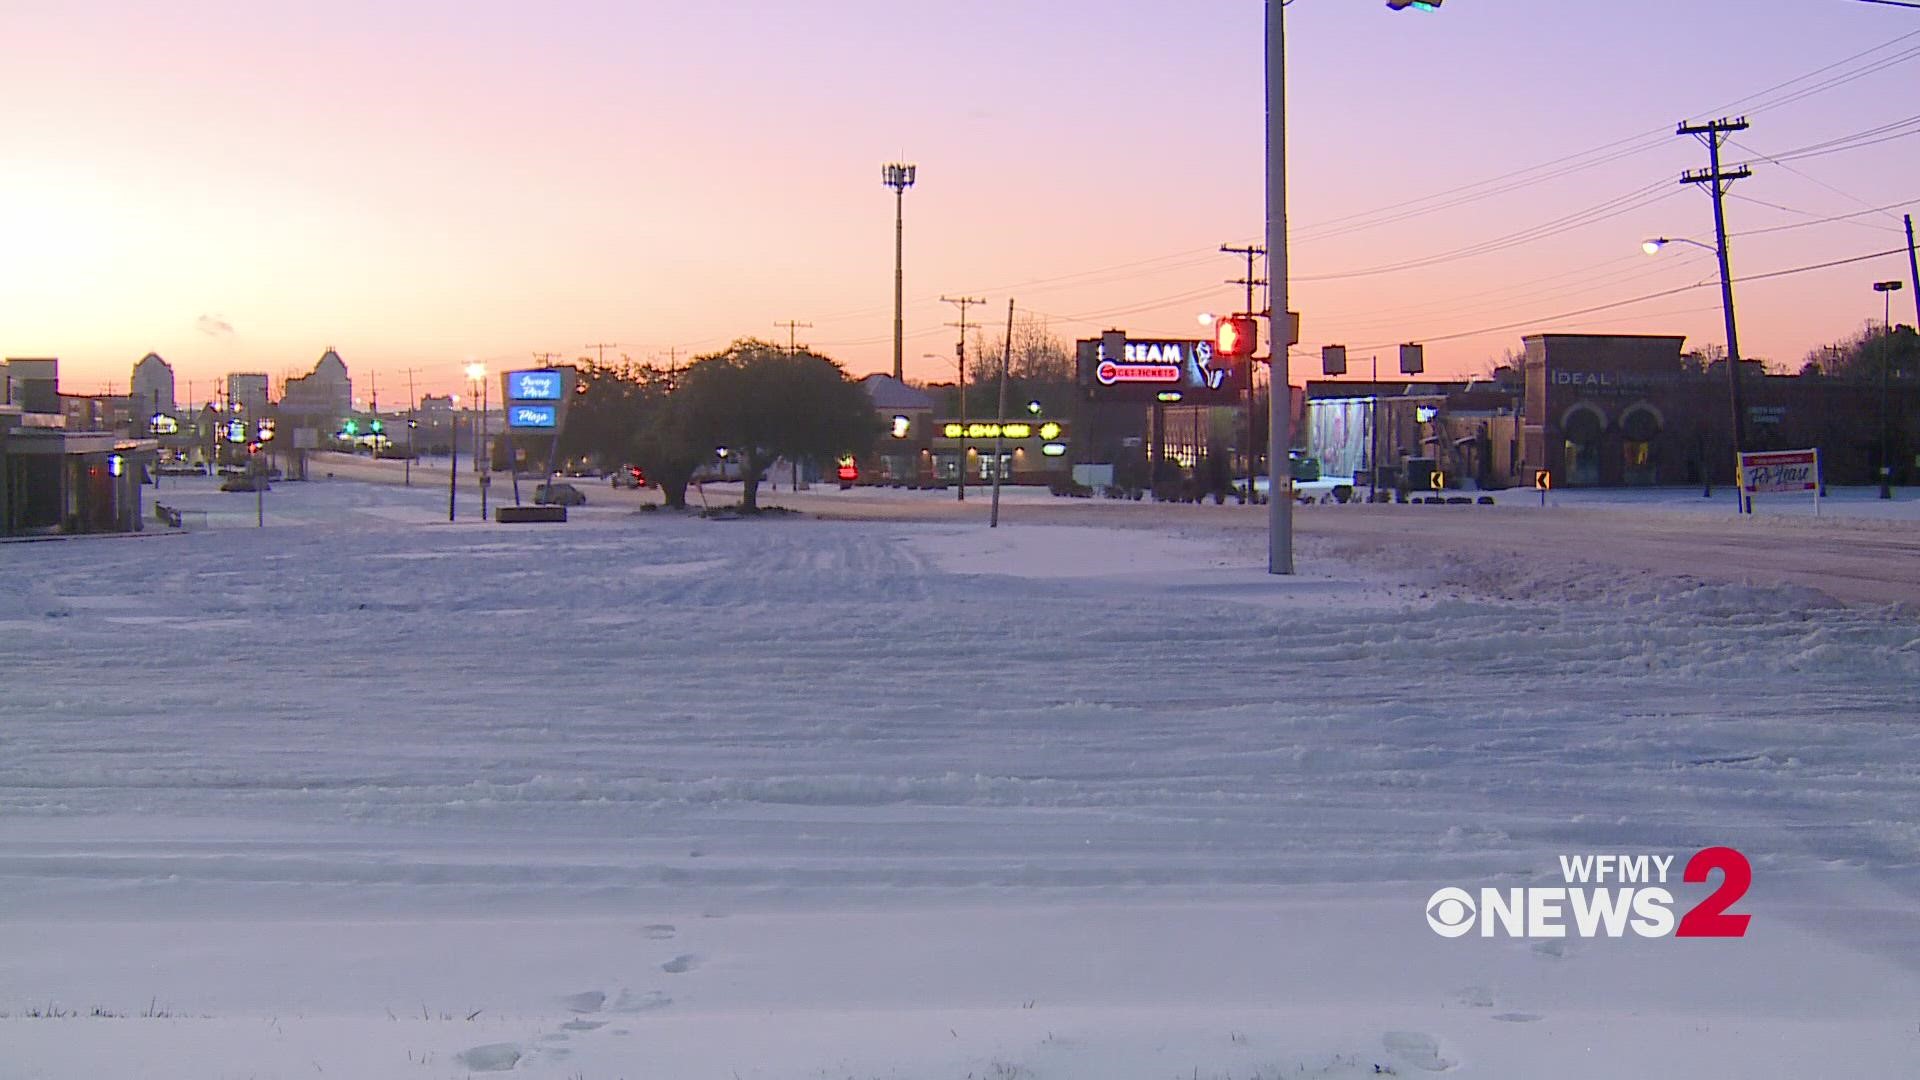 Here's a look at what Greensboro roads look like one day after the winter storm.